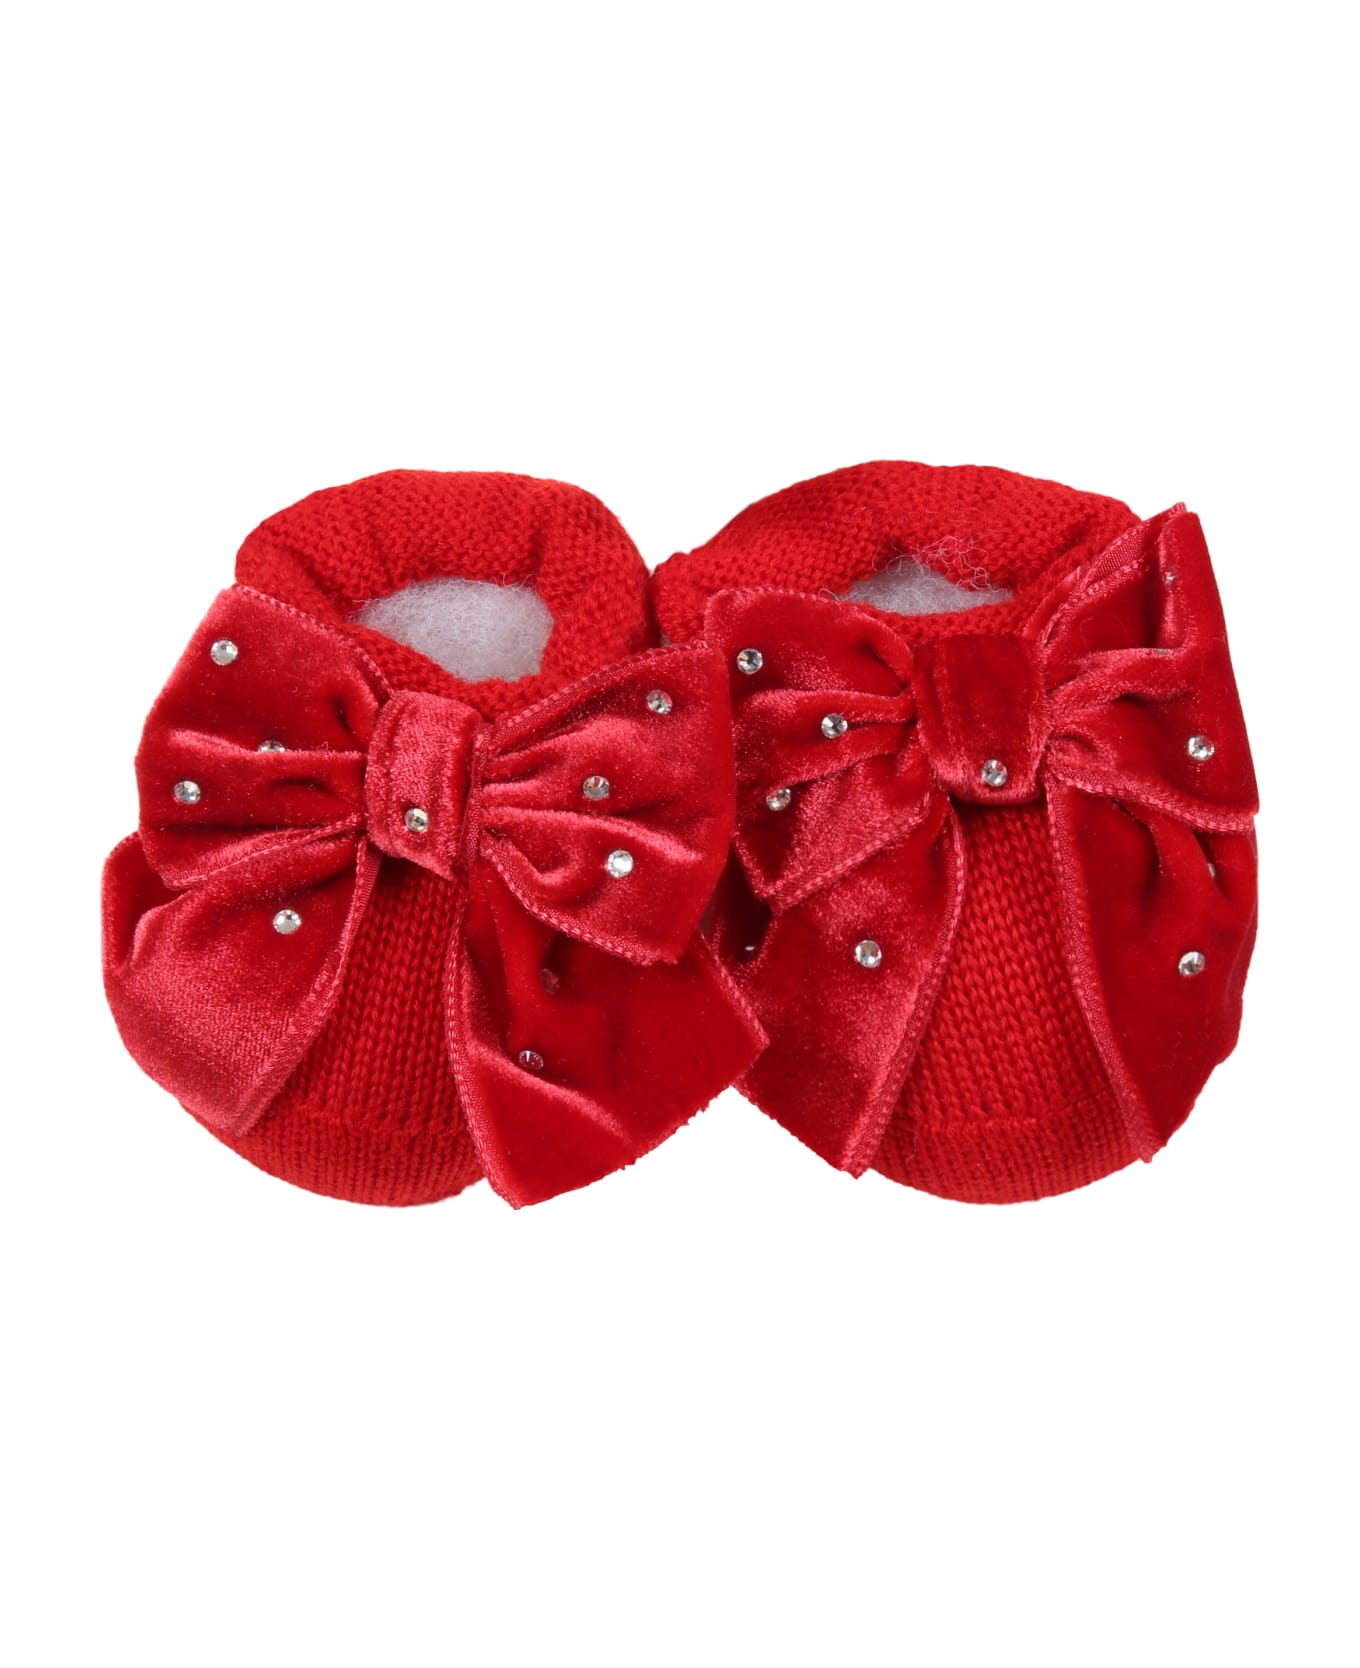 Story Loris Red Bootee For Baby Girl - Red